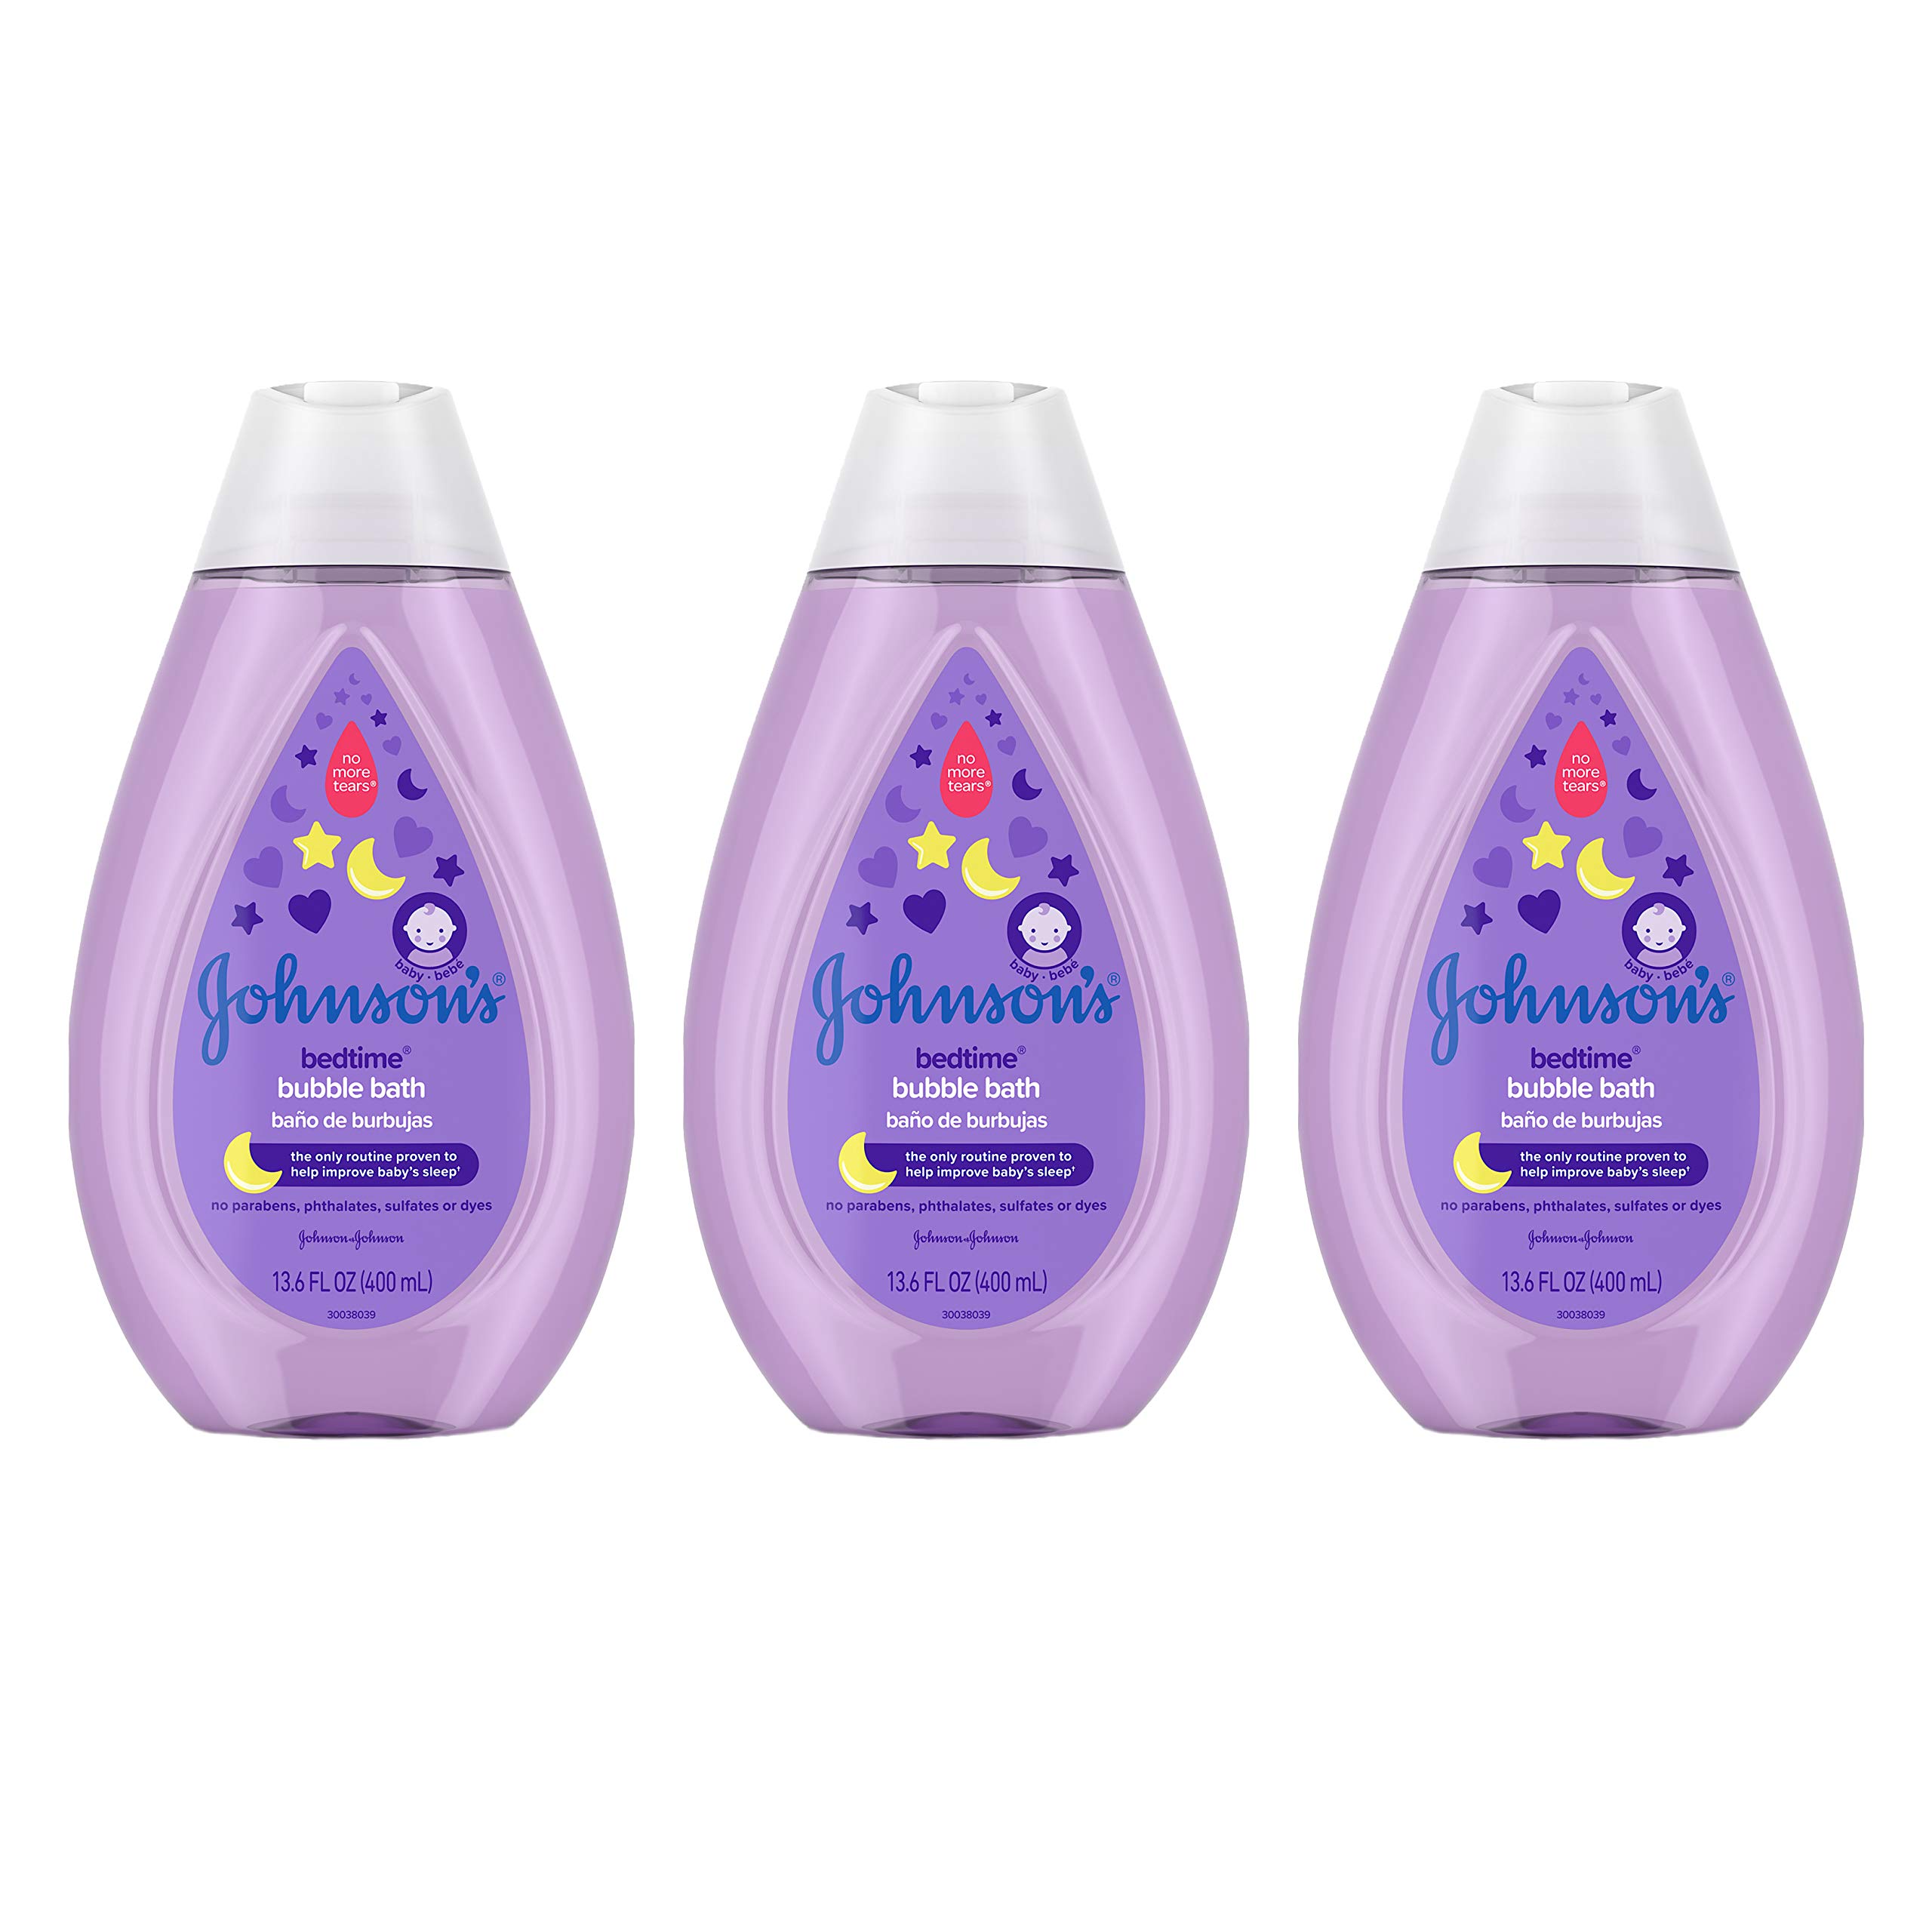 Johnson's Bedtime Baby Bubble Bath with NaturalCalm Aromas, Hypoallergenic and Sulfate-Free Nighttime Bubble Bath, 13.6 fl. oz, Pack of 3